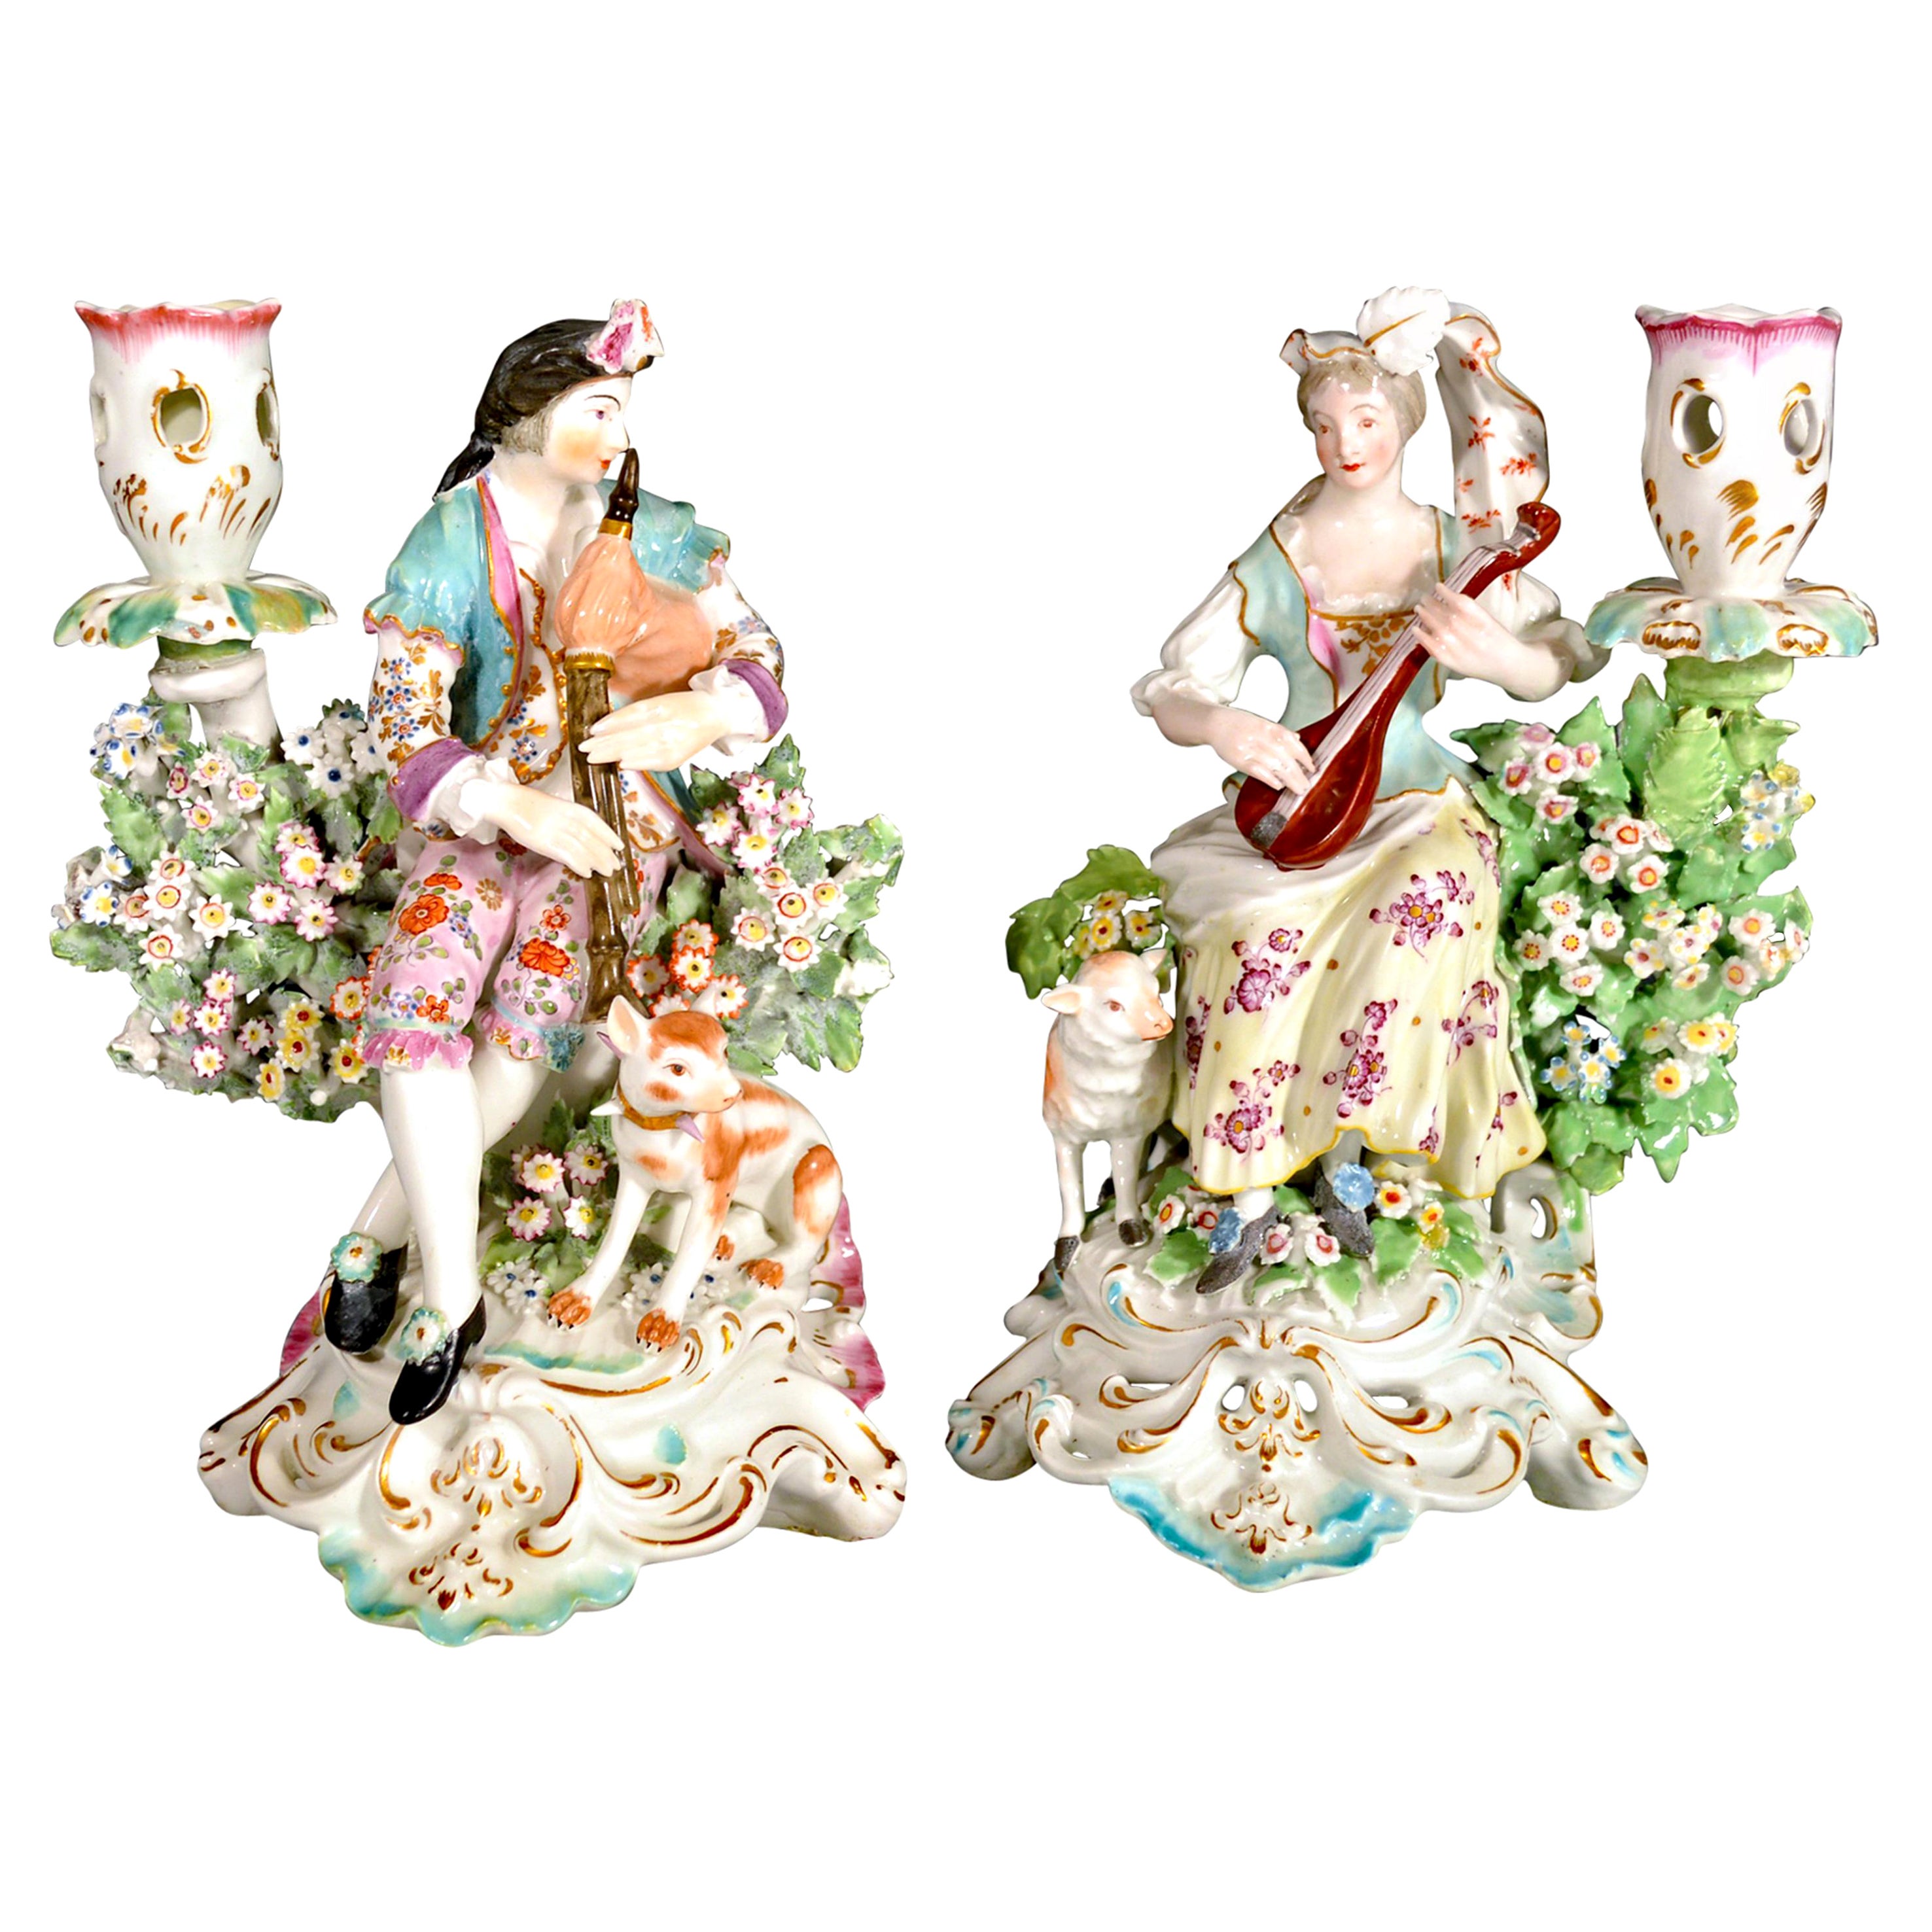 Derby Porcelain Candlesticks with Figures of Musicians, circa 1760-1765 For Sale